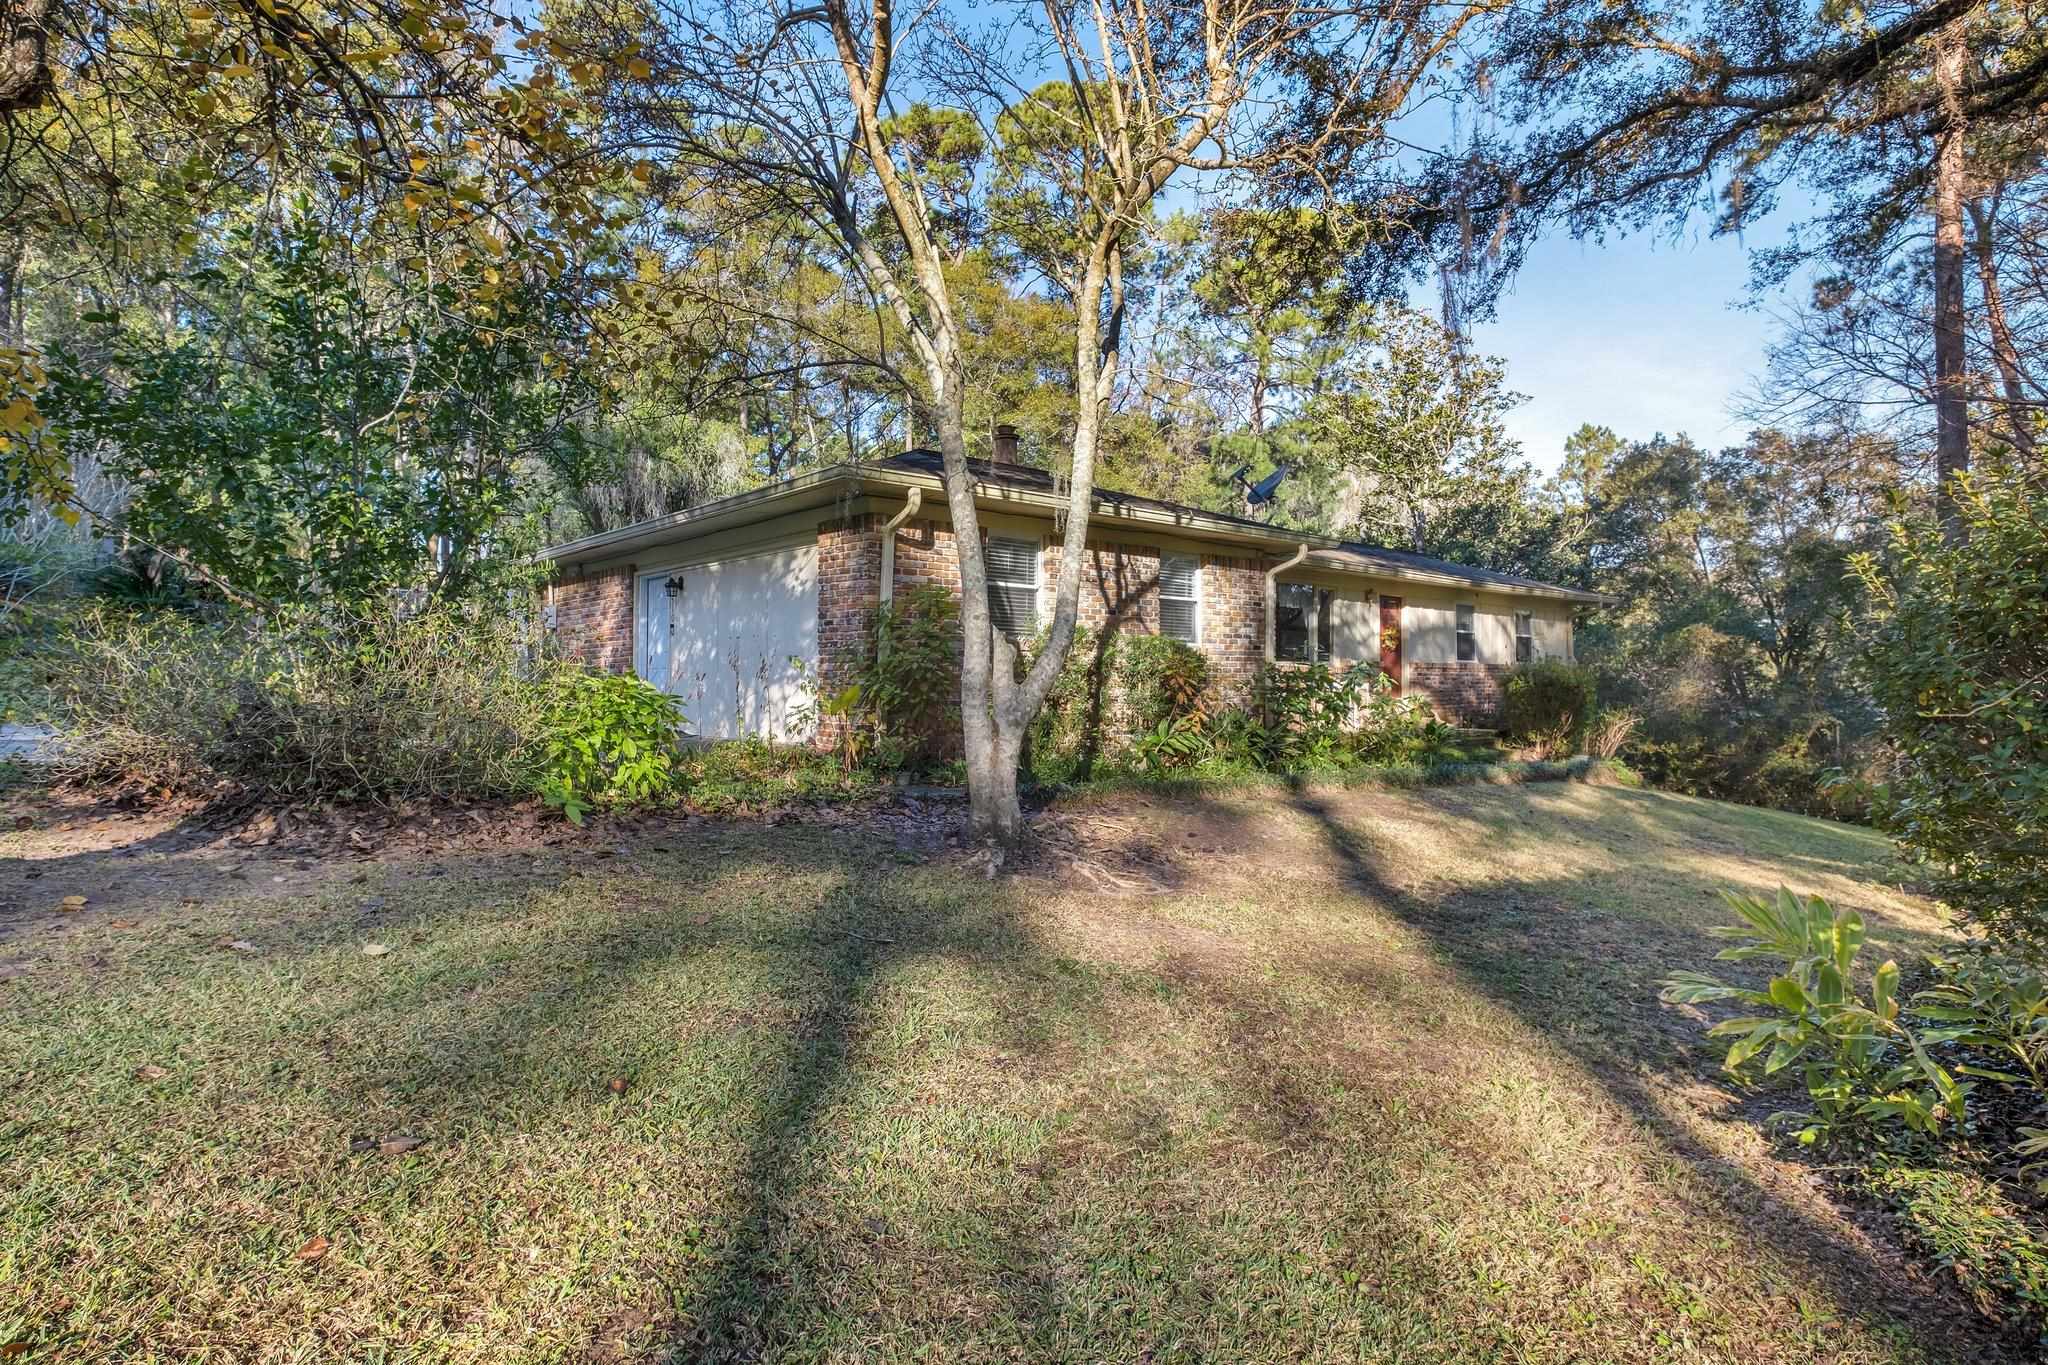 3510 Sharer Road,TALLAHASSEE,Florida 32312,3 Bedrooms Bedrooms,2 BathroomsBathrooms,Detached single family,3510 Sharer Road,368380